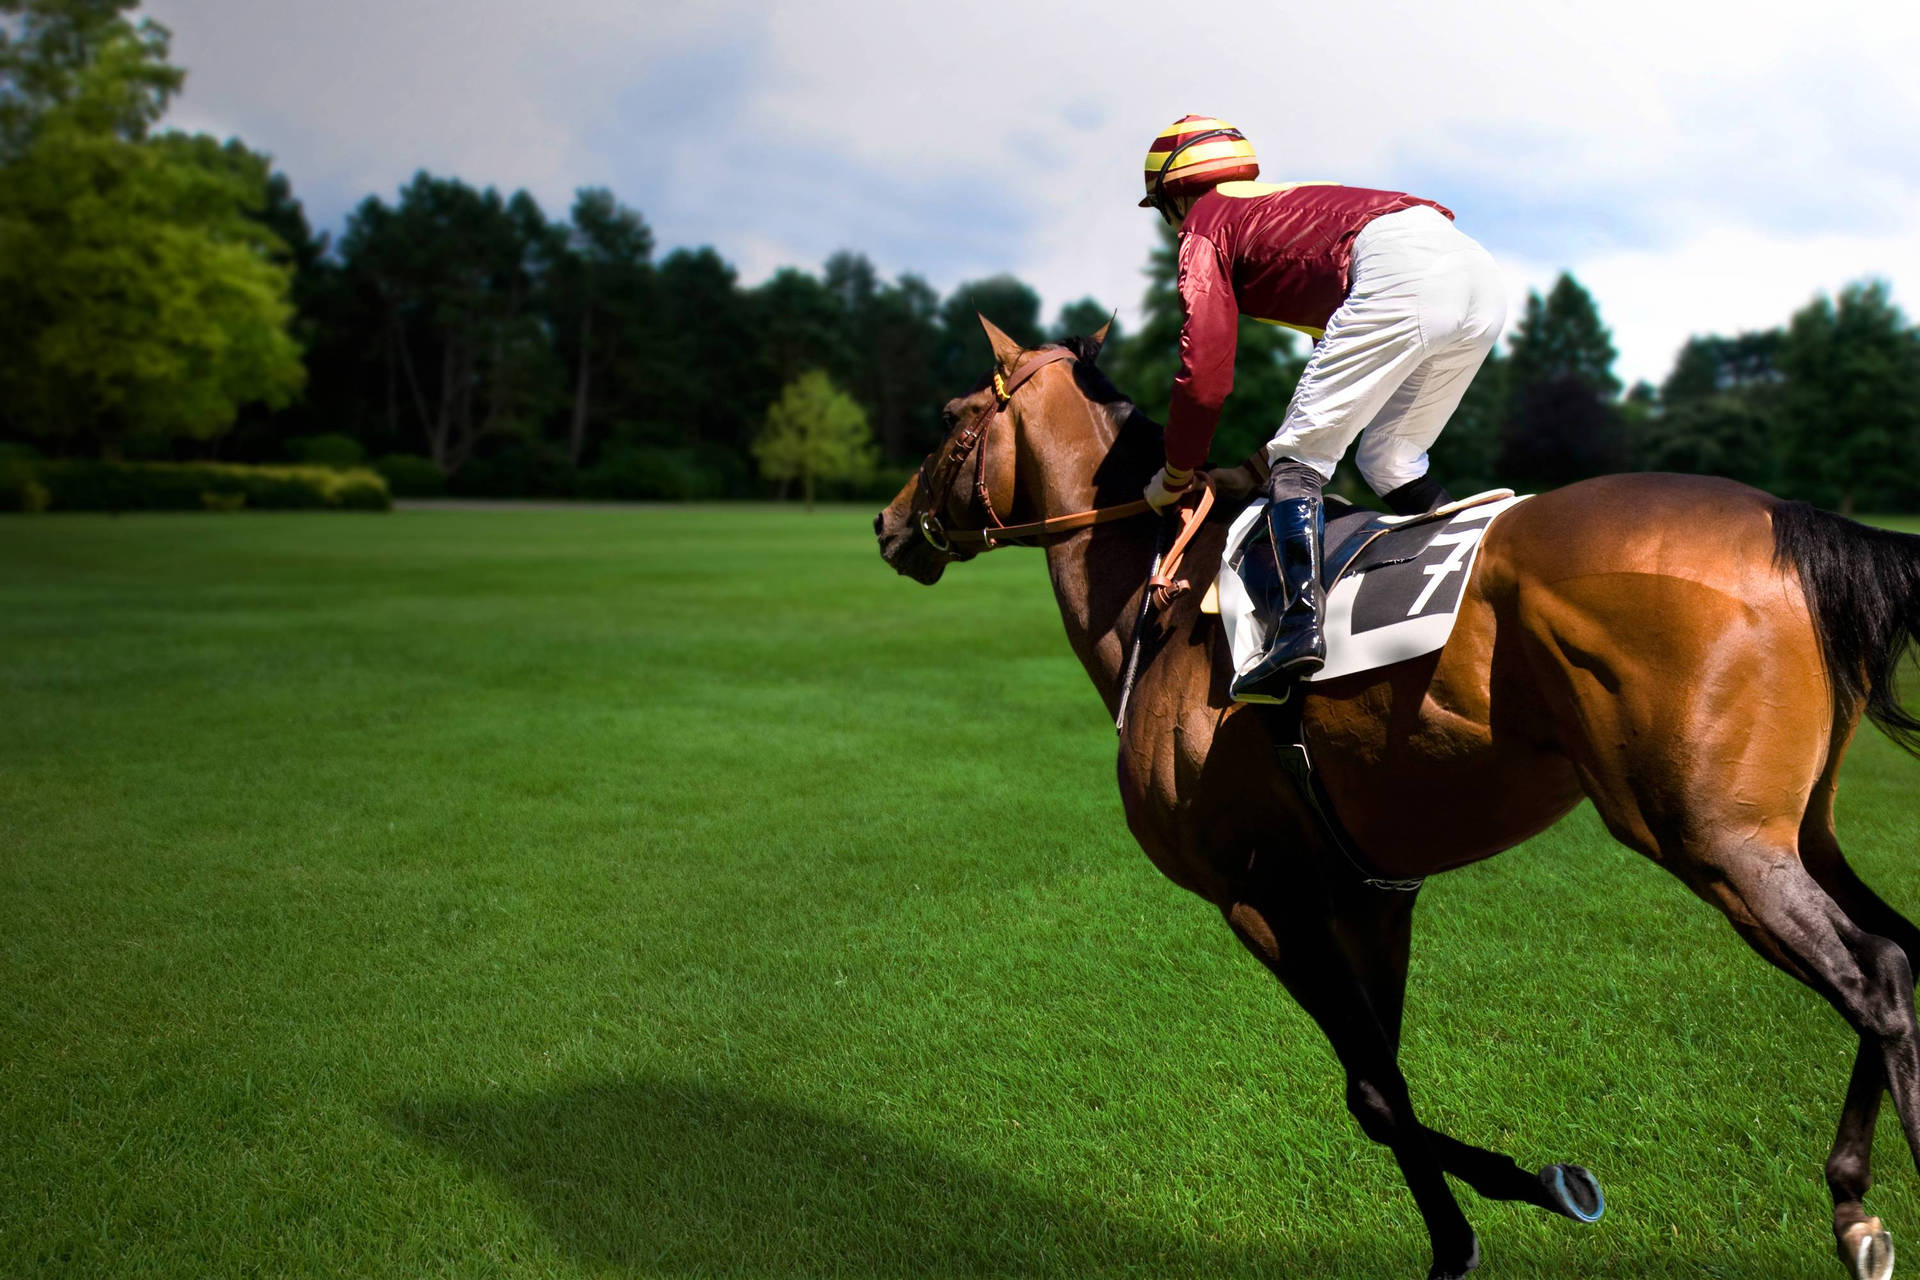 Horse Racing On Firm Grass Ground Background